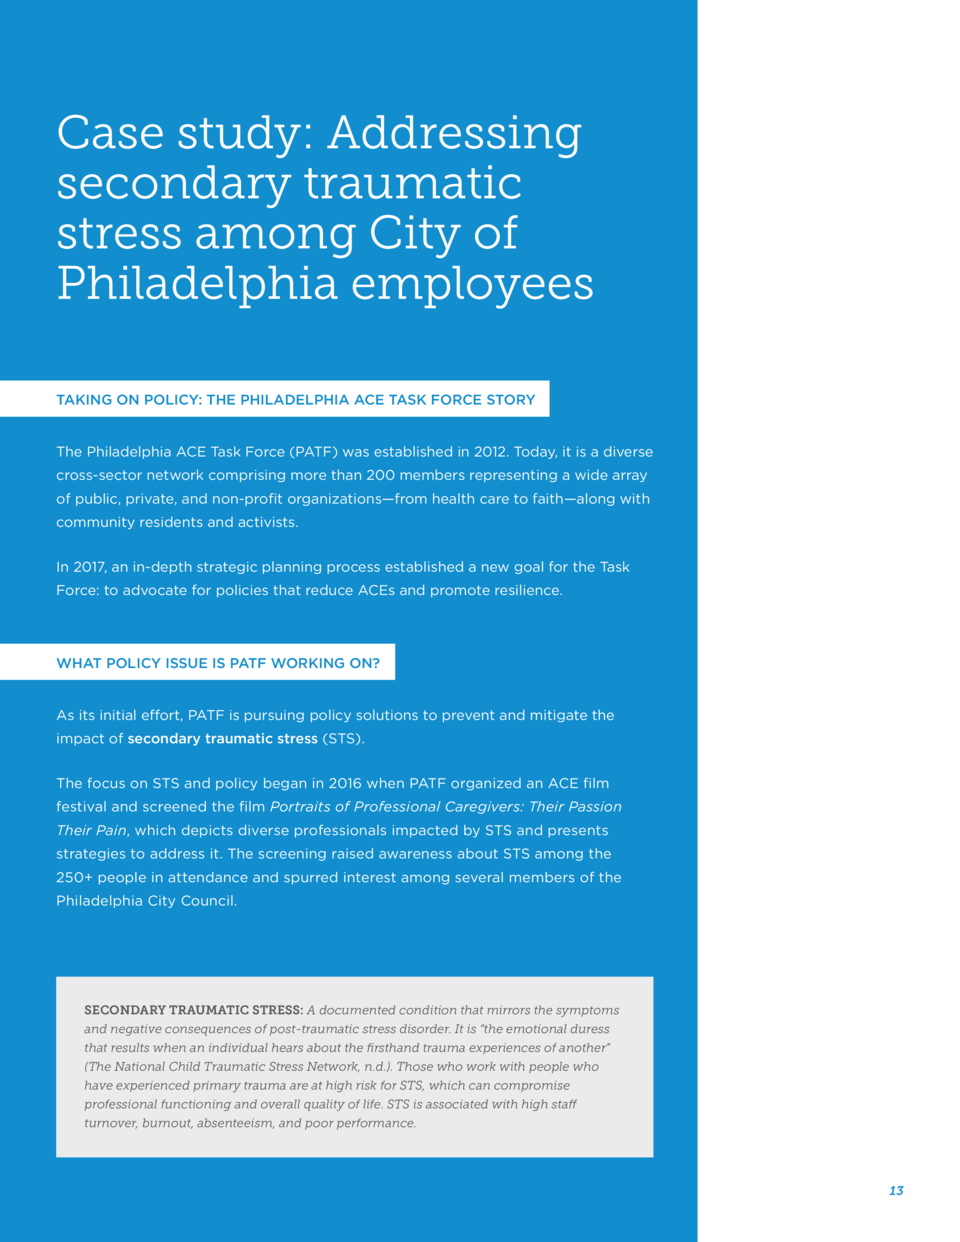 New Toolkit Mobilizing Action For Resilient Communities Through - case study addressing secondary traumatic stress among city of philadelphia e!   mployees taking on policy the philadelphia